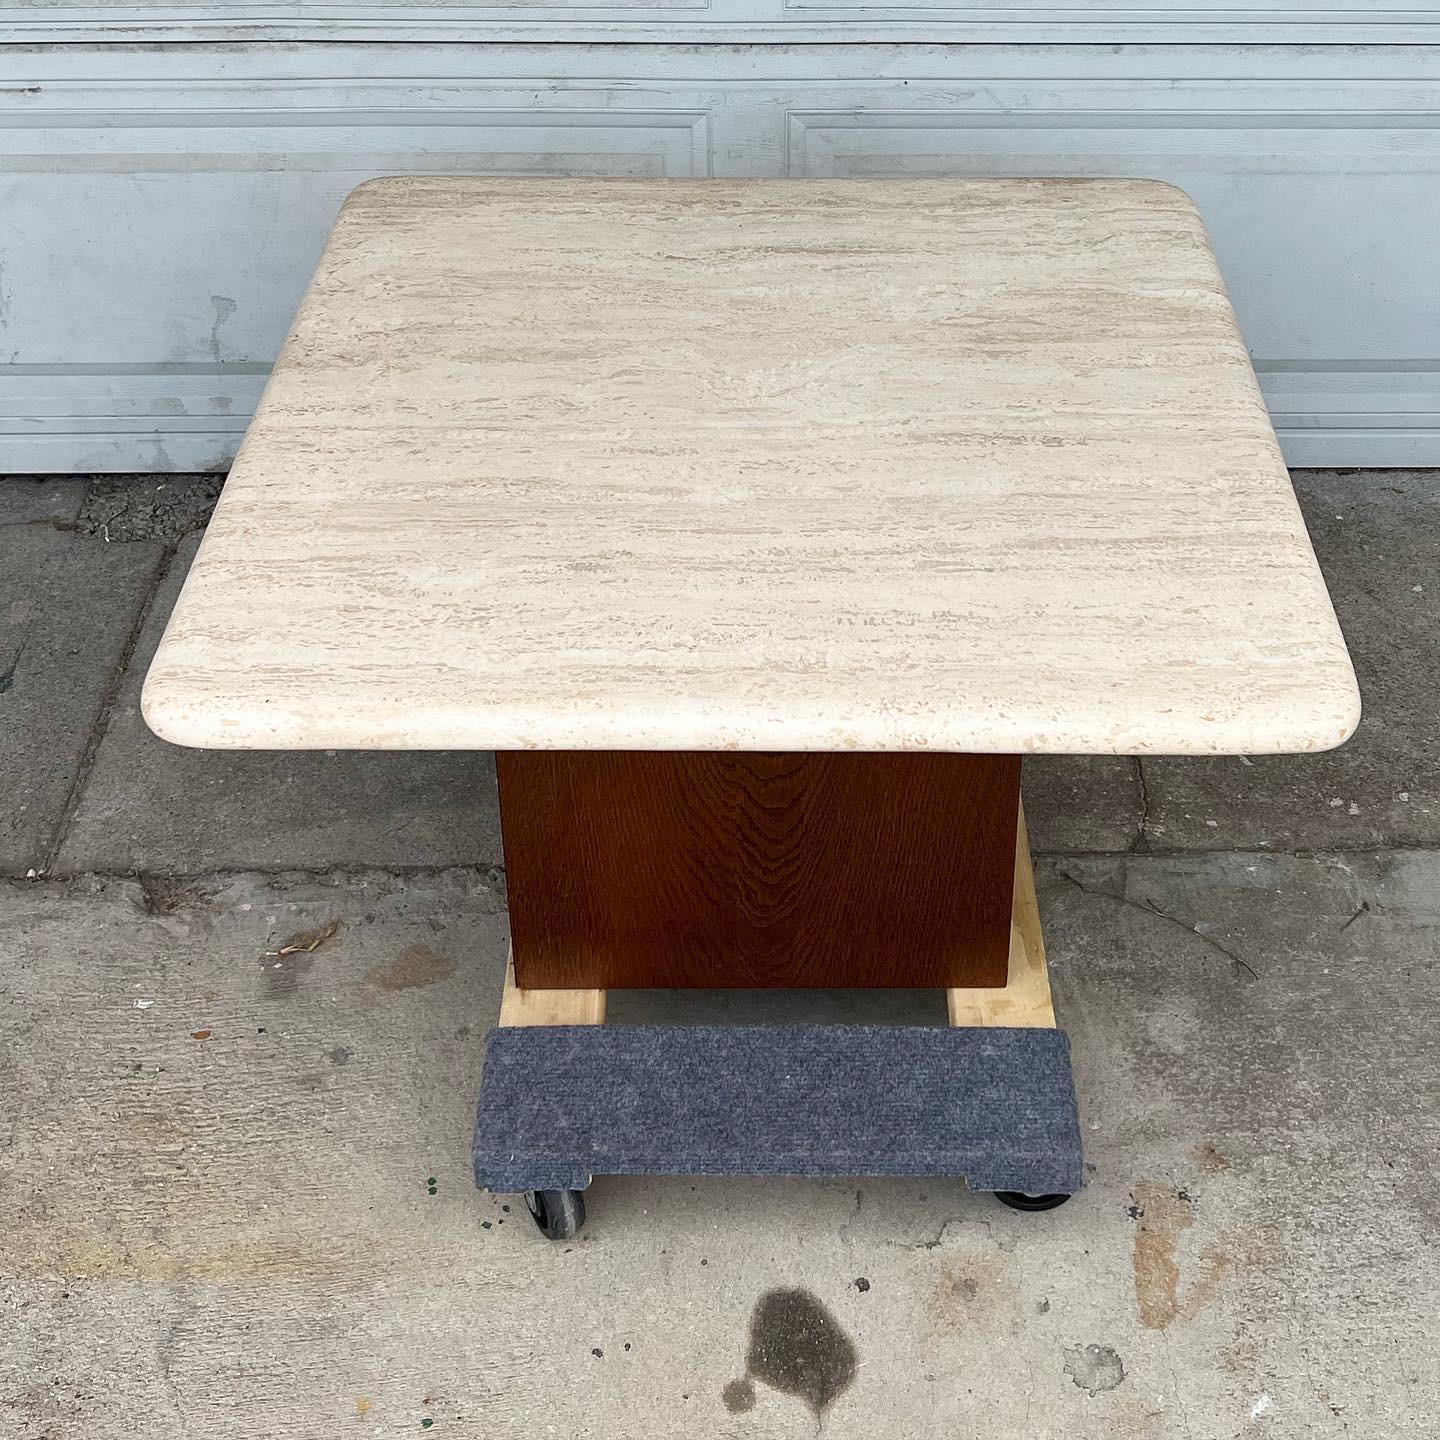 Petite coffee table with perfect travertine top atop a hollow walnut stained wooden cube base. Excellent condition. c late 1980s early 1990s. Base appears more cherry in photos but is closer to a walnut- see close up  for  accurate coloring

the